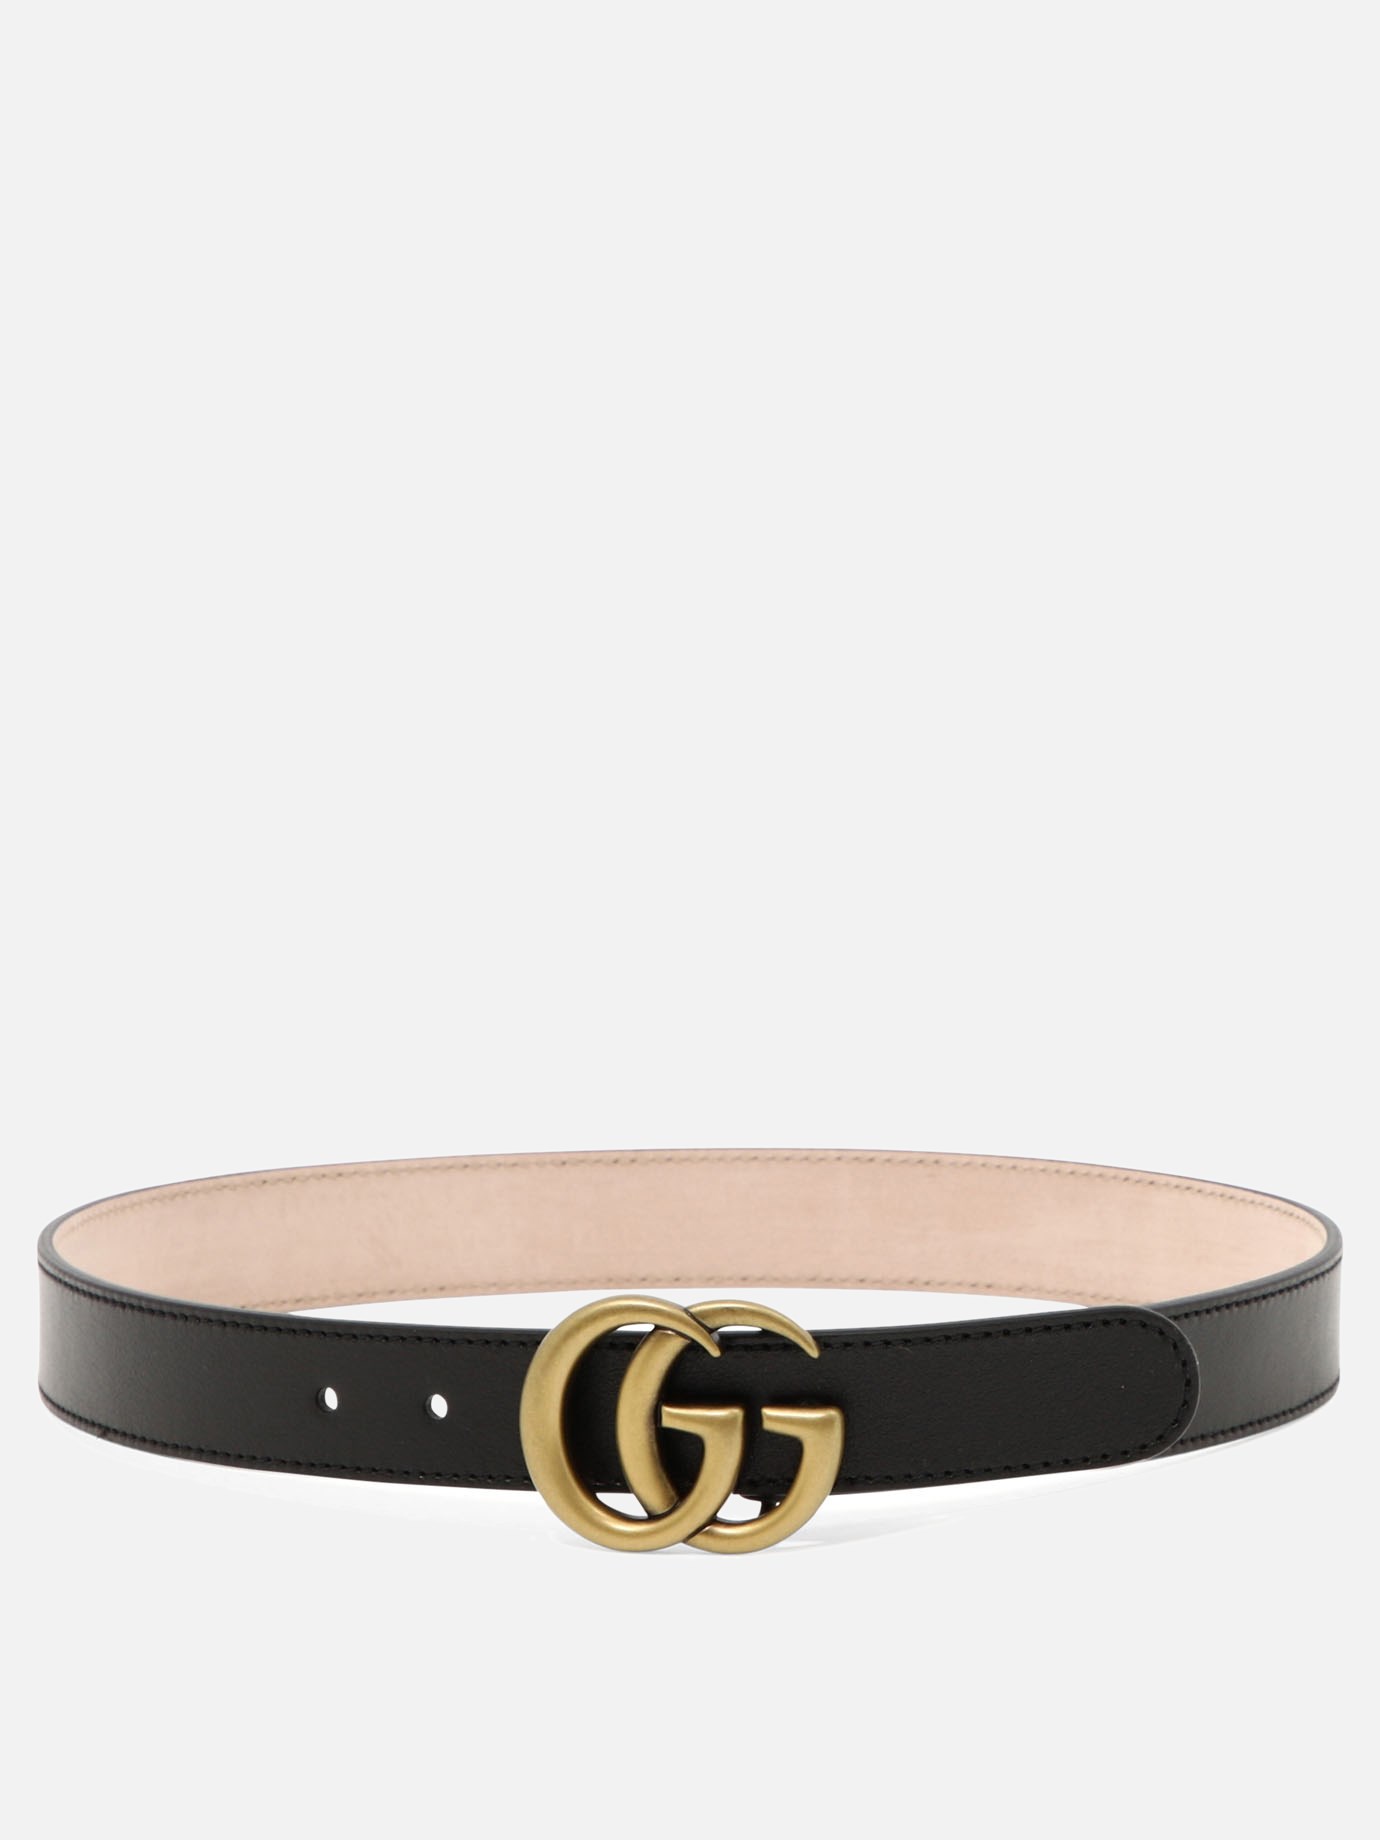  Double G  beltby Gucci Kids - 4